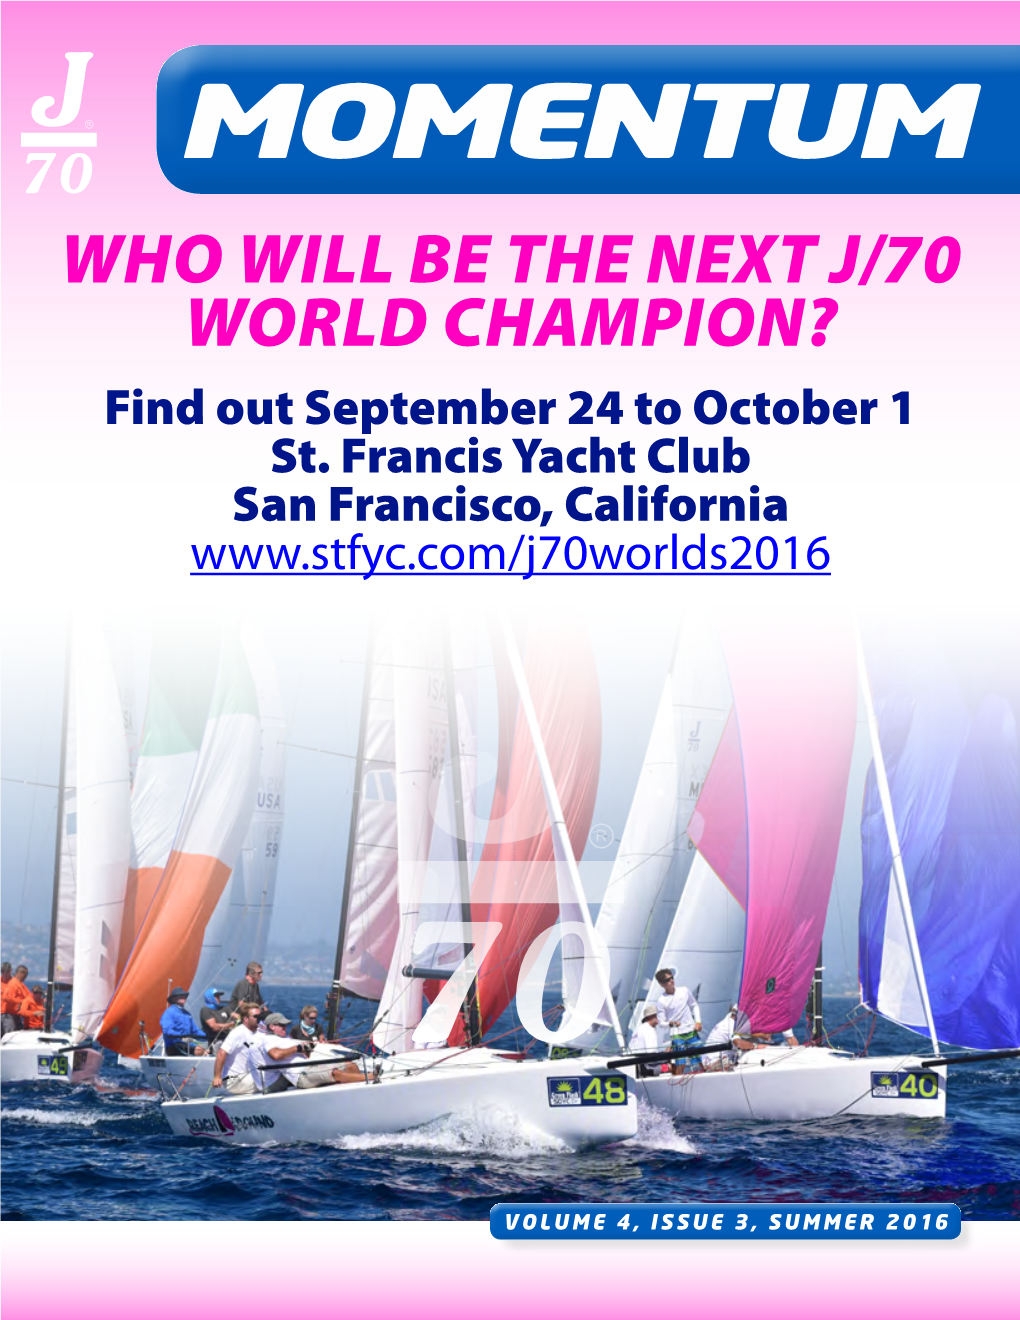 MOMENTUM WHO WILL BE the NEXT J/70 WORLD CHAMPION? Find out September 24 to October 1 St